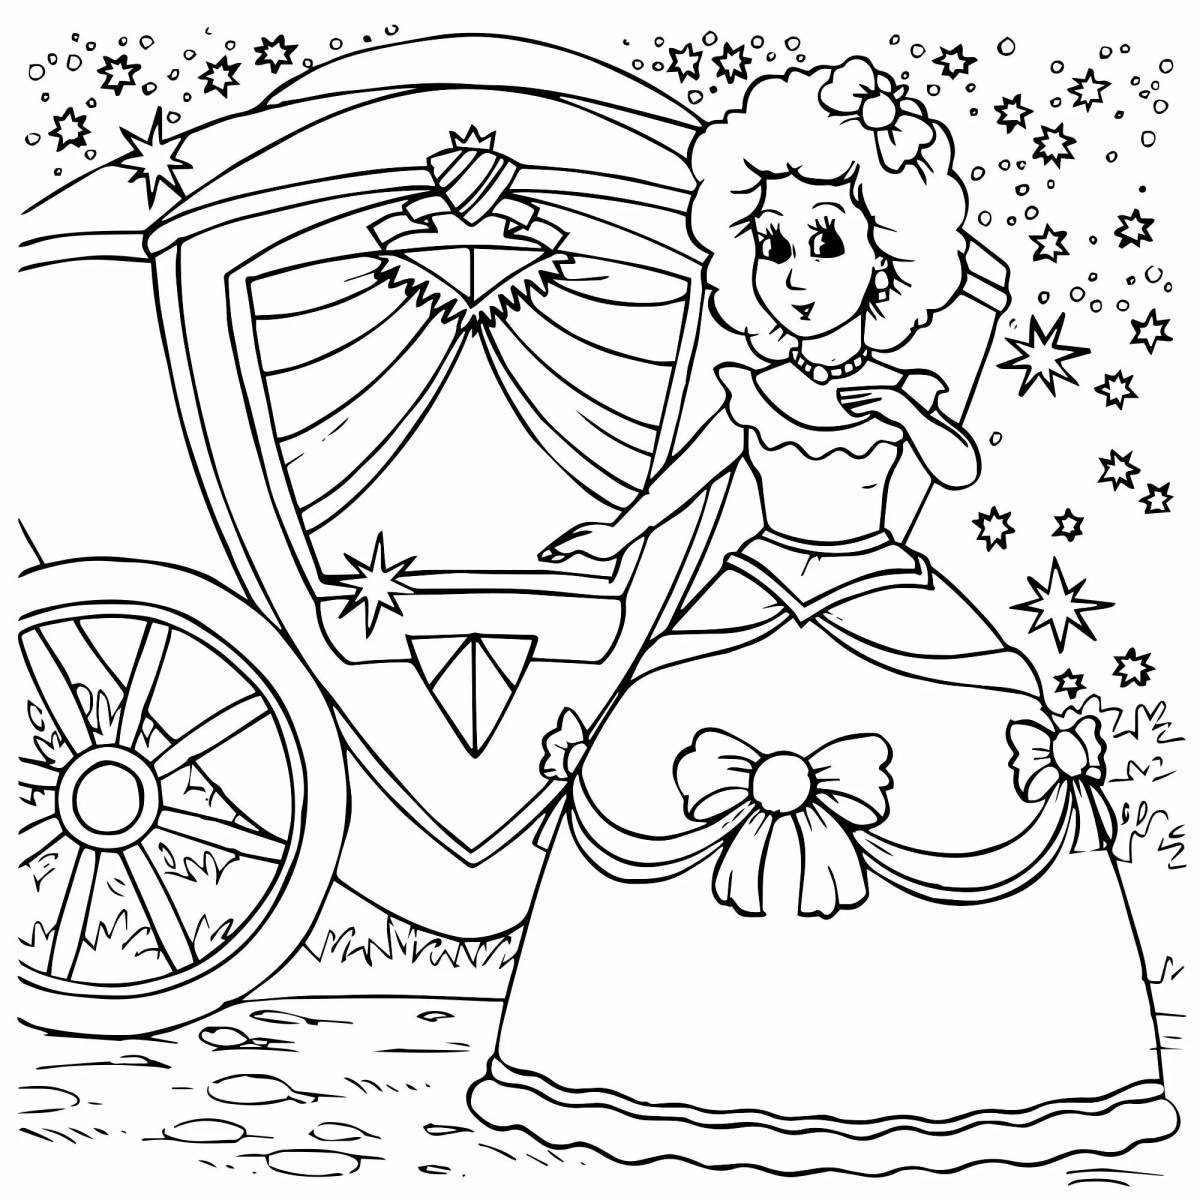 Coloring page exquisite princess in a carriage